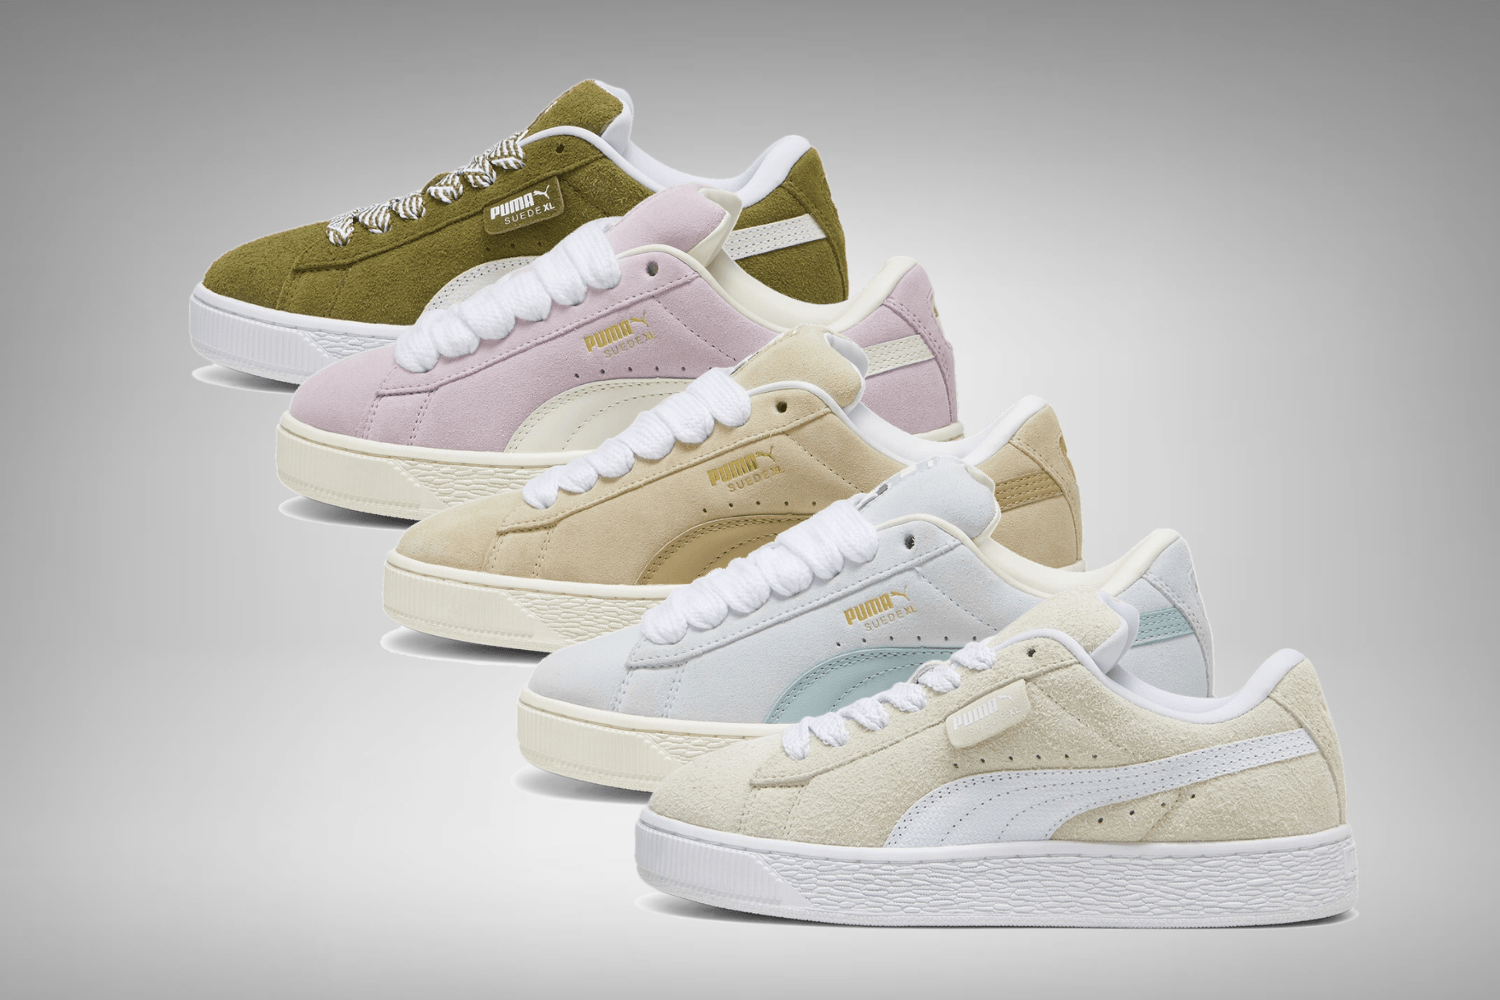 Release reminder: PUMA Suede XL is dropping in five colorways